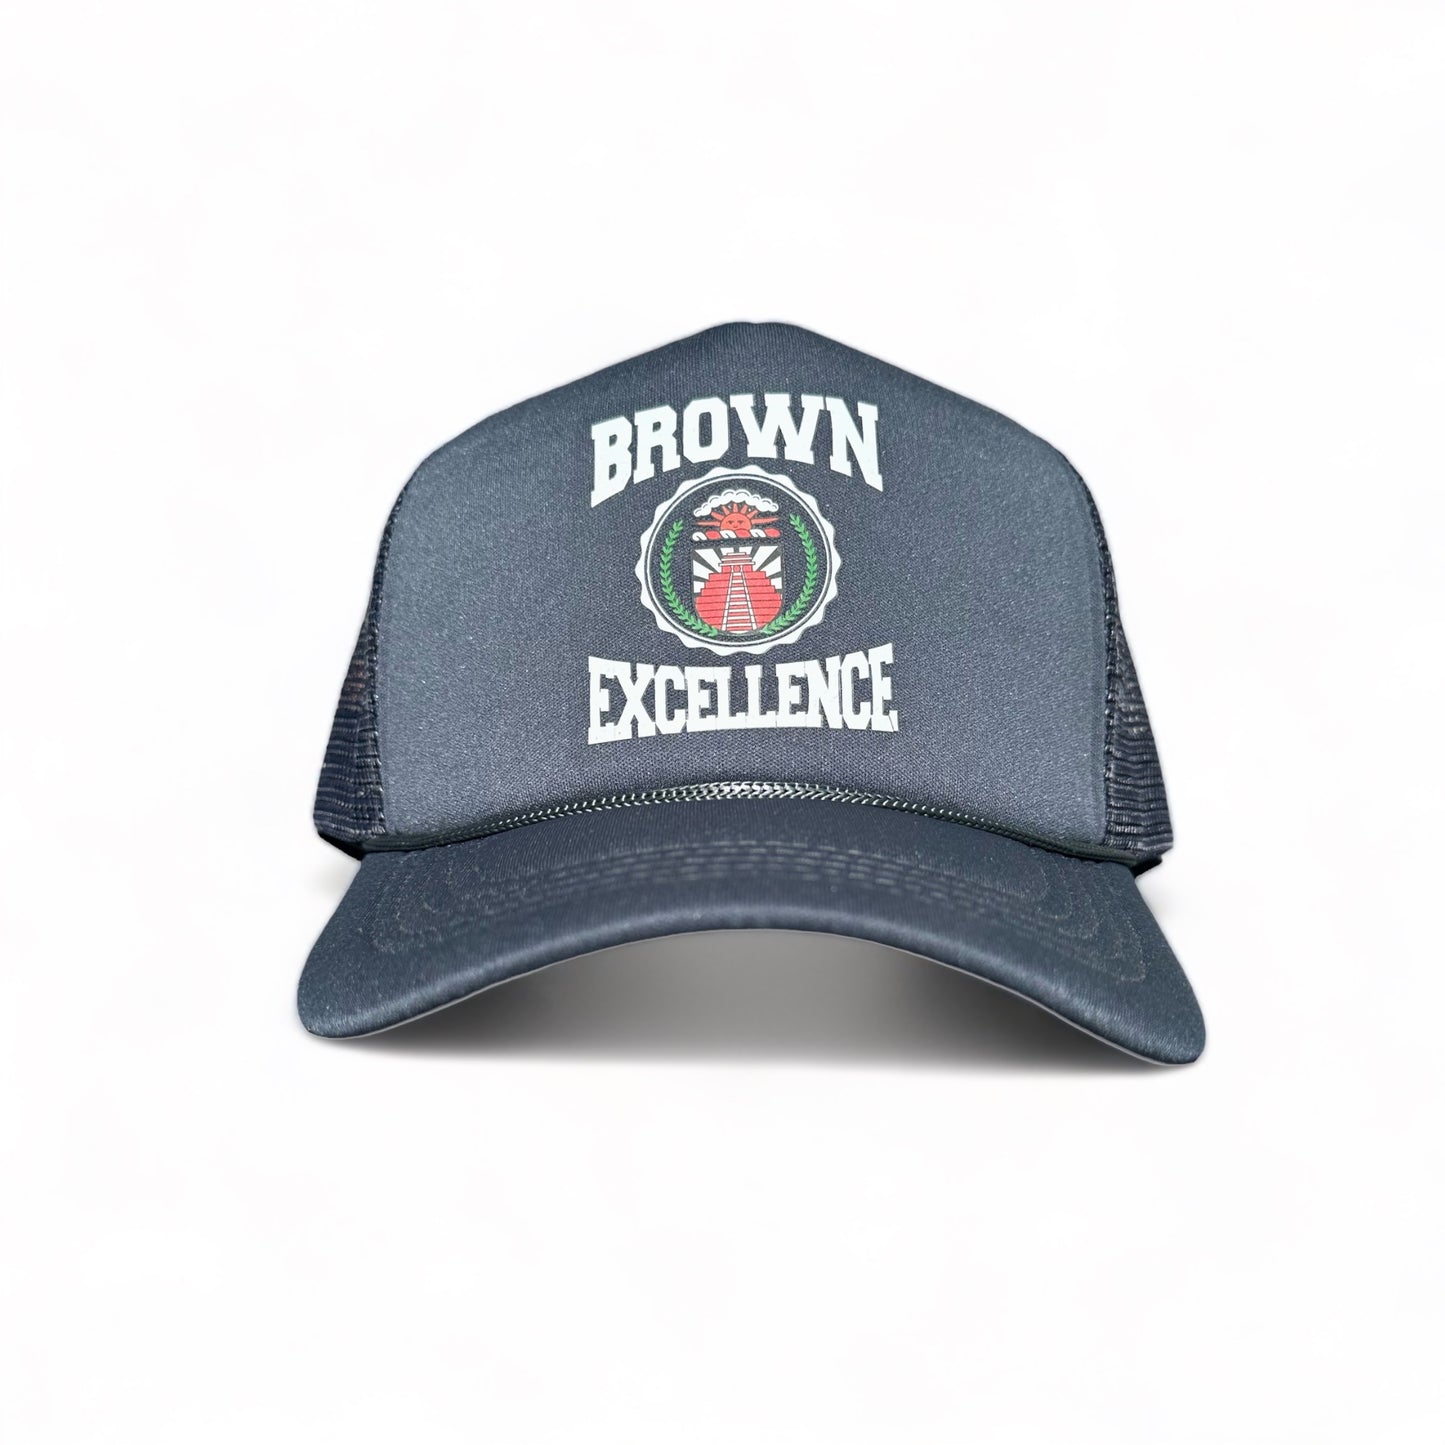 BROWN EXCELLENCE TRUCKER - GREY